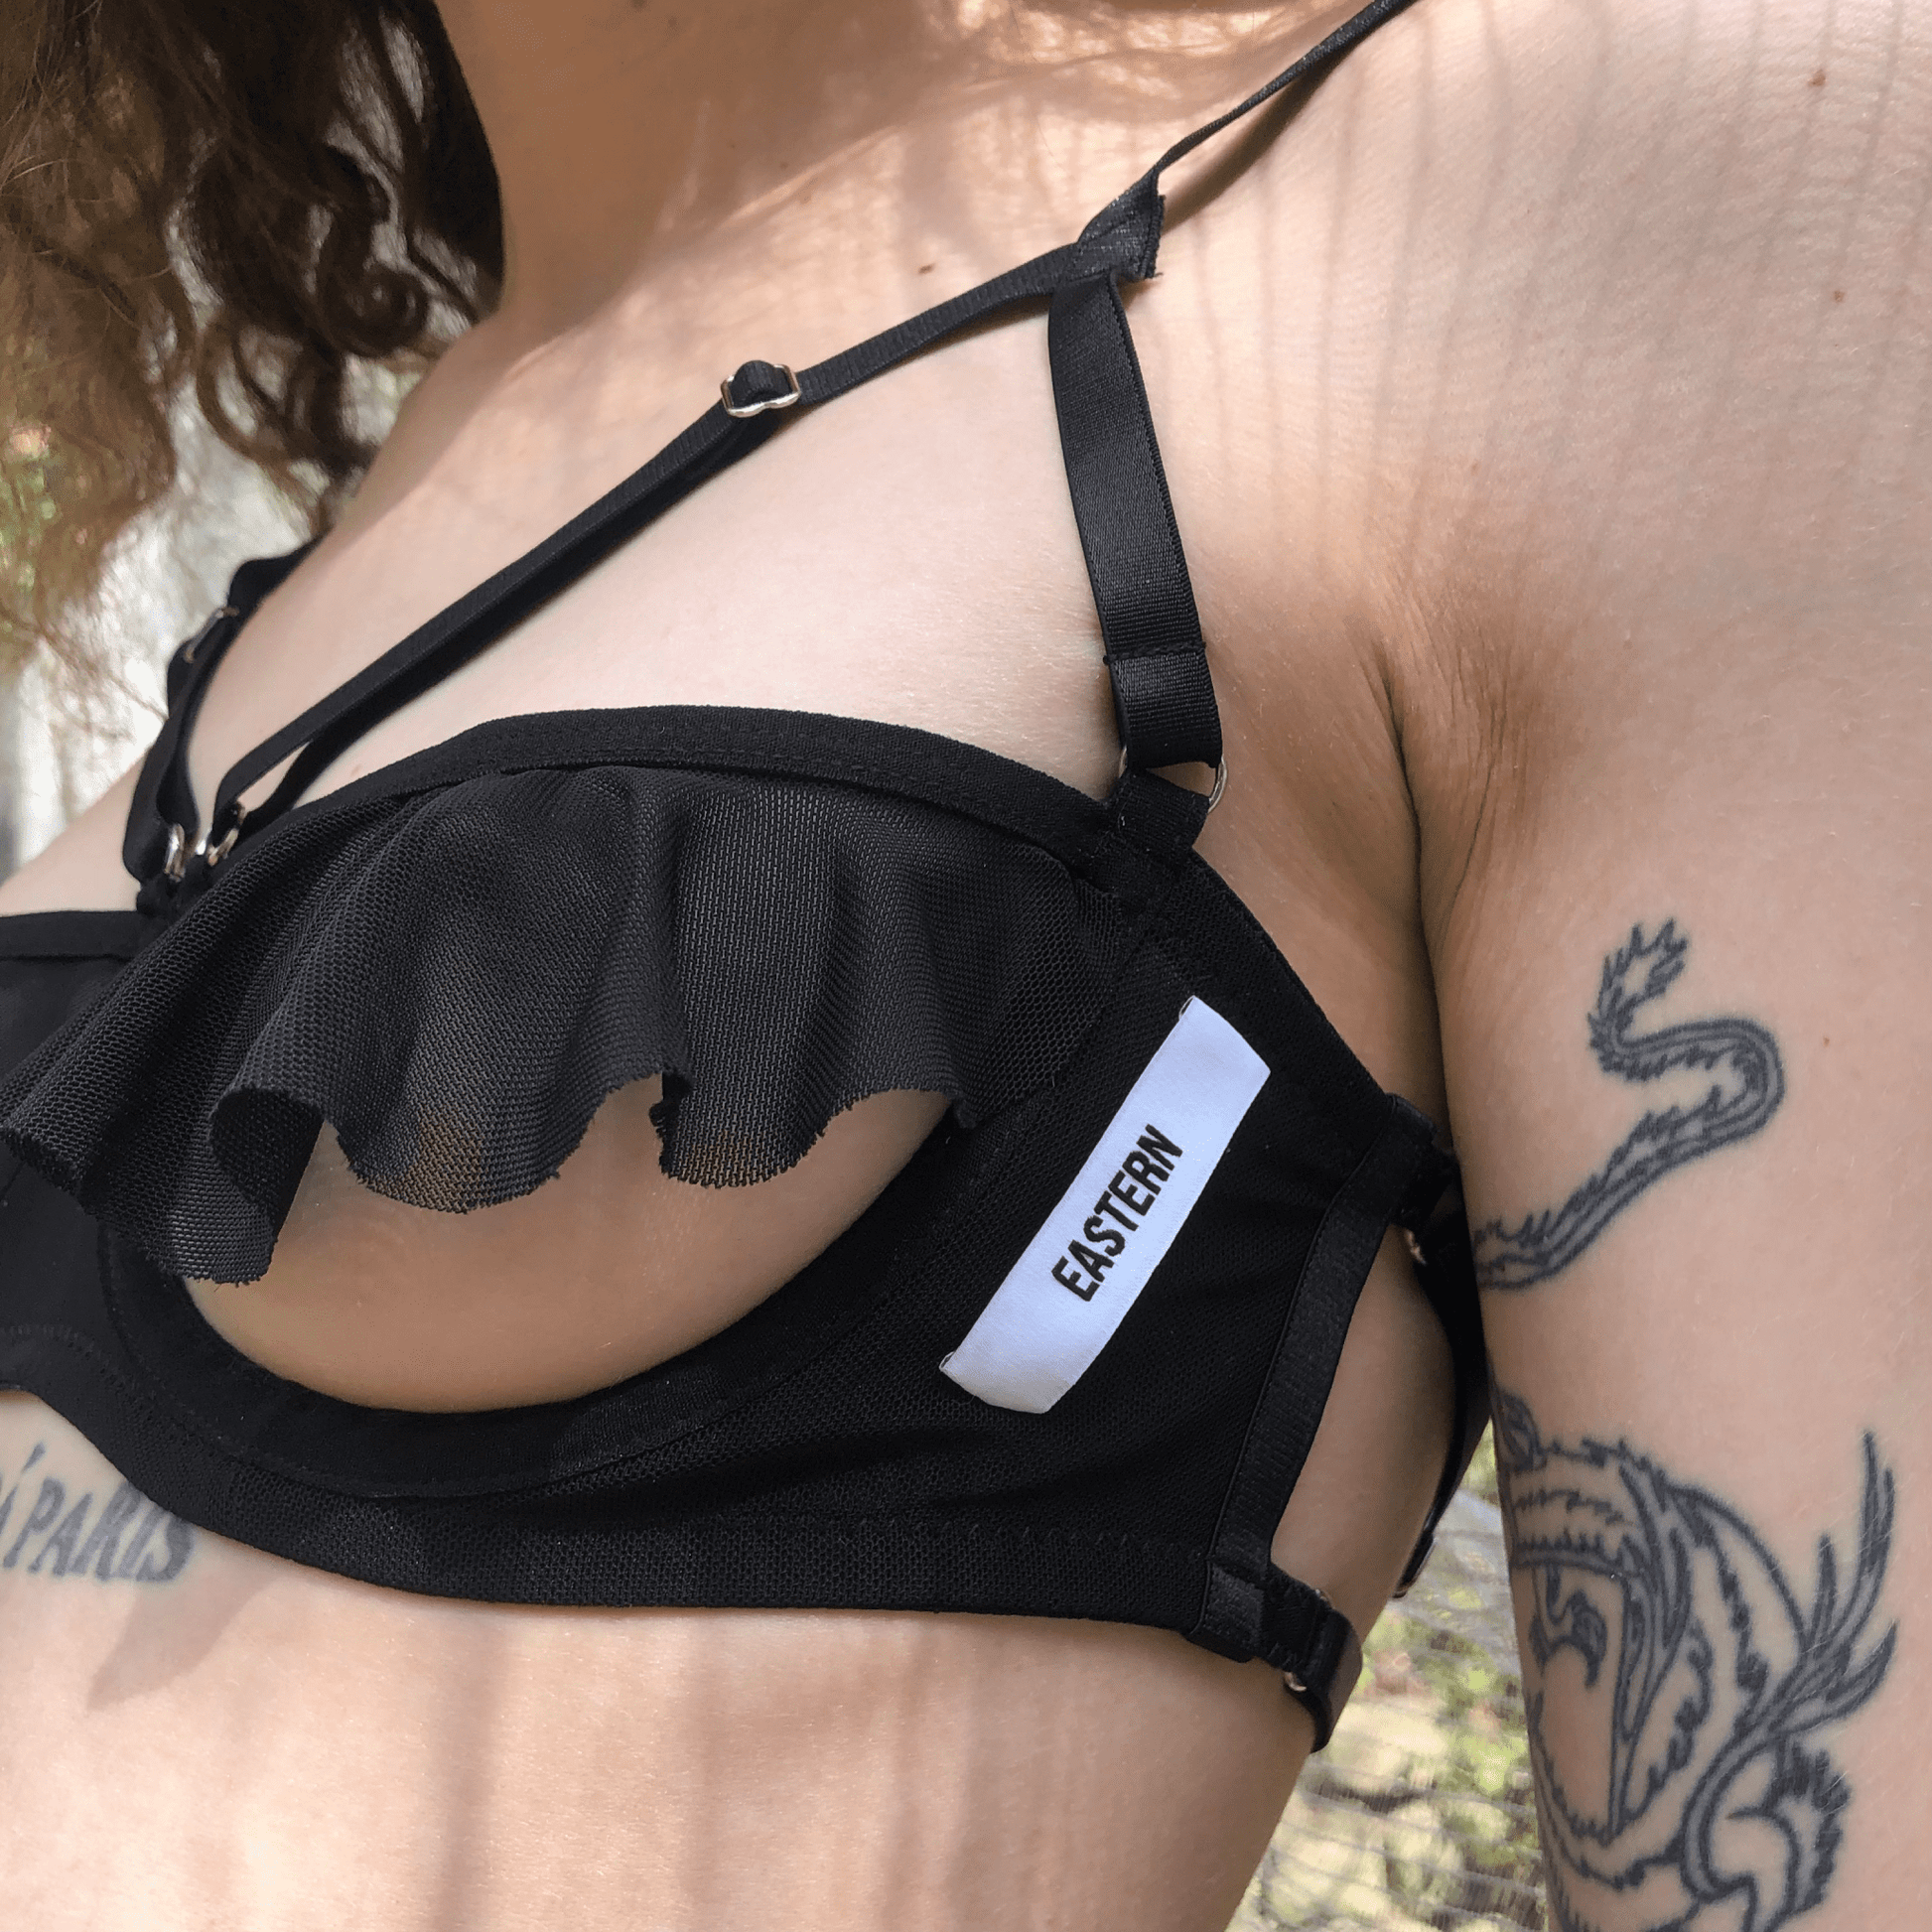 Product image featuring a black mesh lingerie bra with an Eastern logo. This alluring bra showcases a combination of sheer mesh fabric and intricate Eastern-themed branding, offering a blend of sensuality and style in intimate apparel.